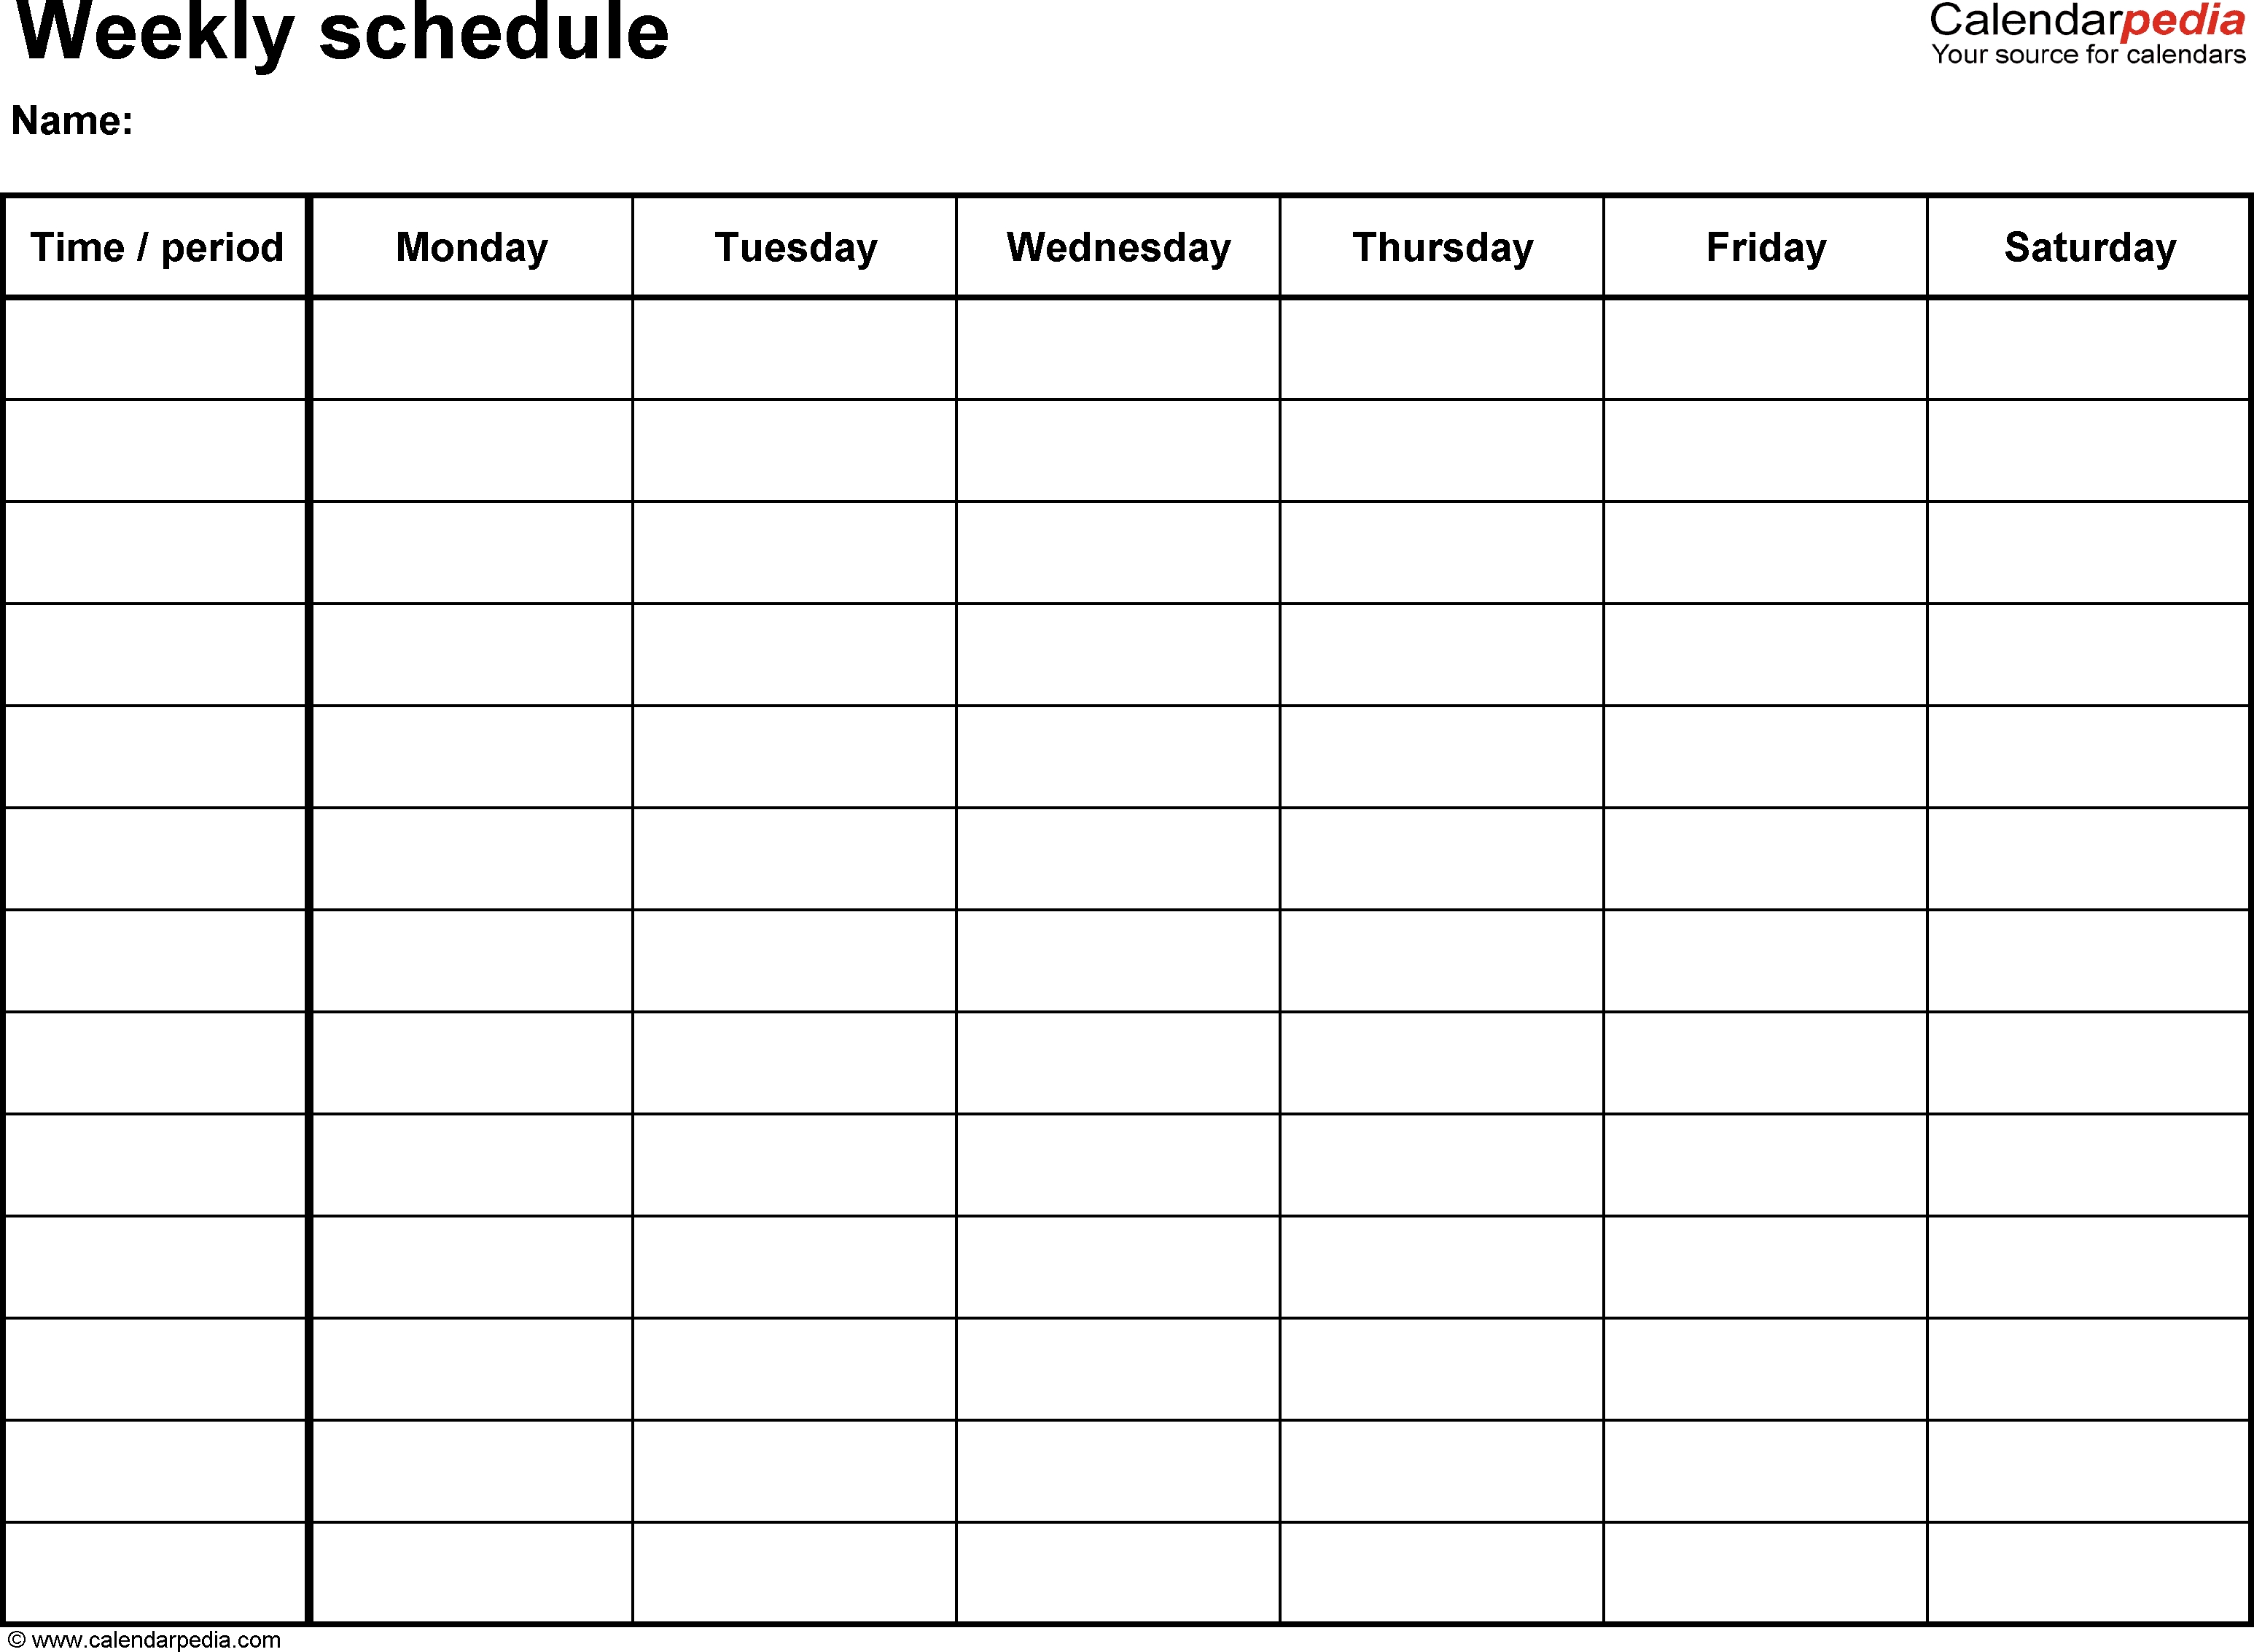 Free Weekly Schedule Templates For Word - 18 Templates pertaining to Free Printable Calendar Monday Through Friday With Notes